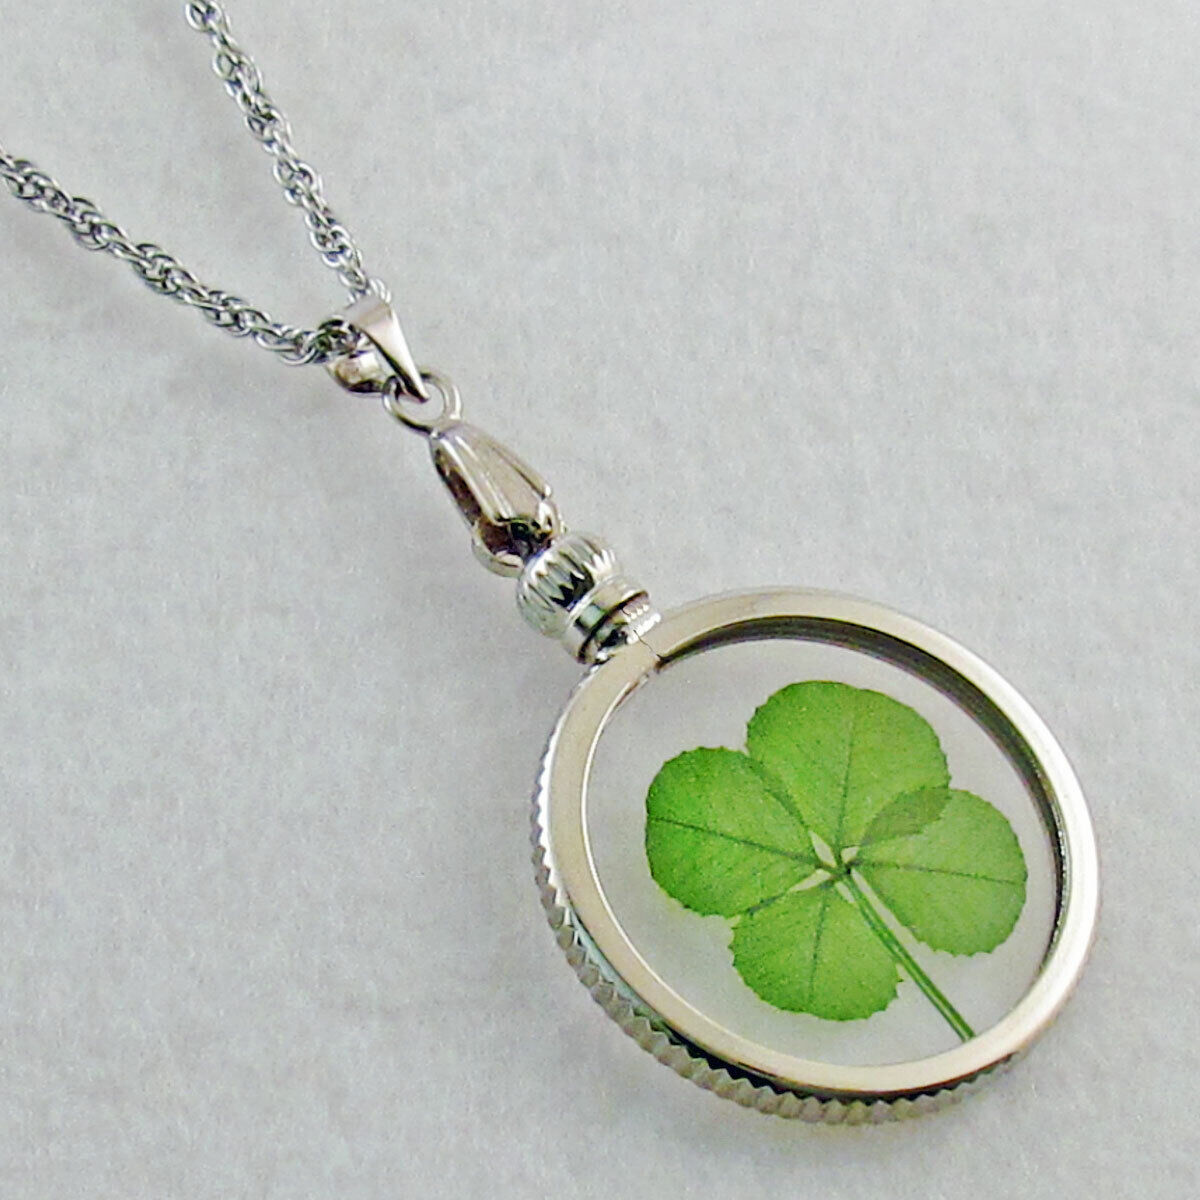 Good Luck Charm Silver Necklace with a Real Four Leaf Clover Item SN-4J